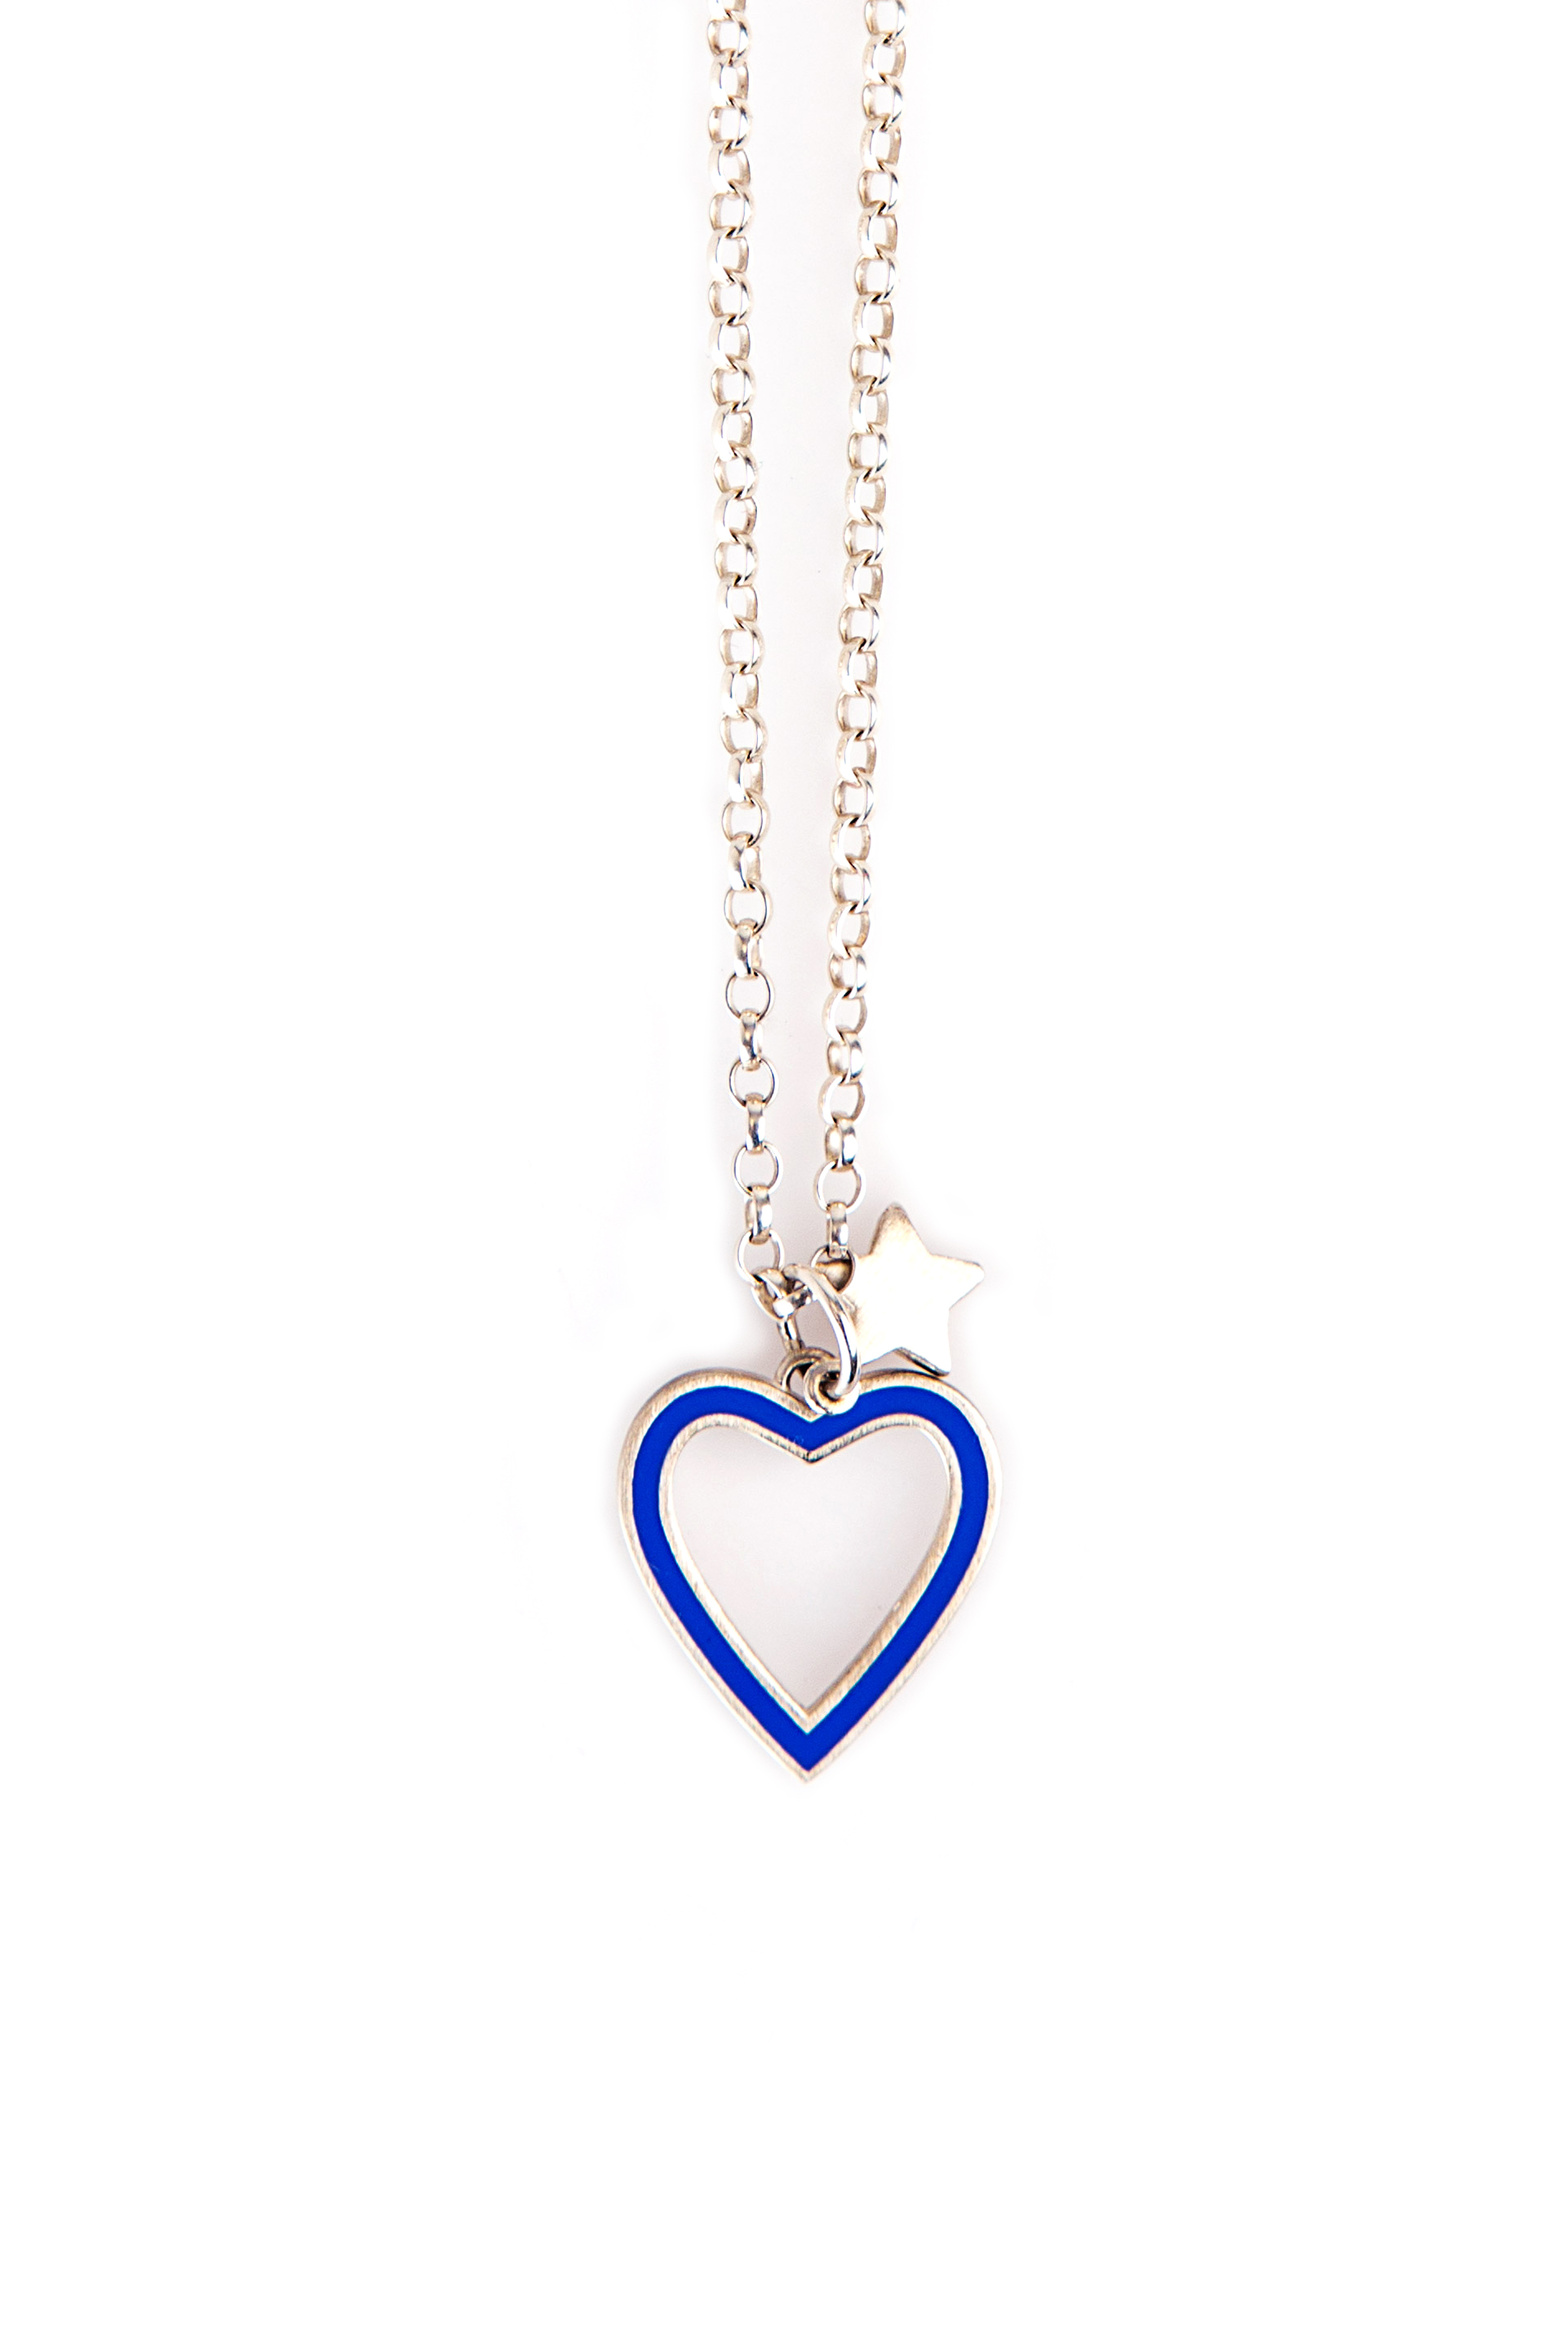 cb468_heart_necklace_perwinkle_c_white_background.jpg